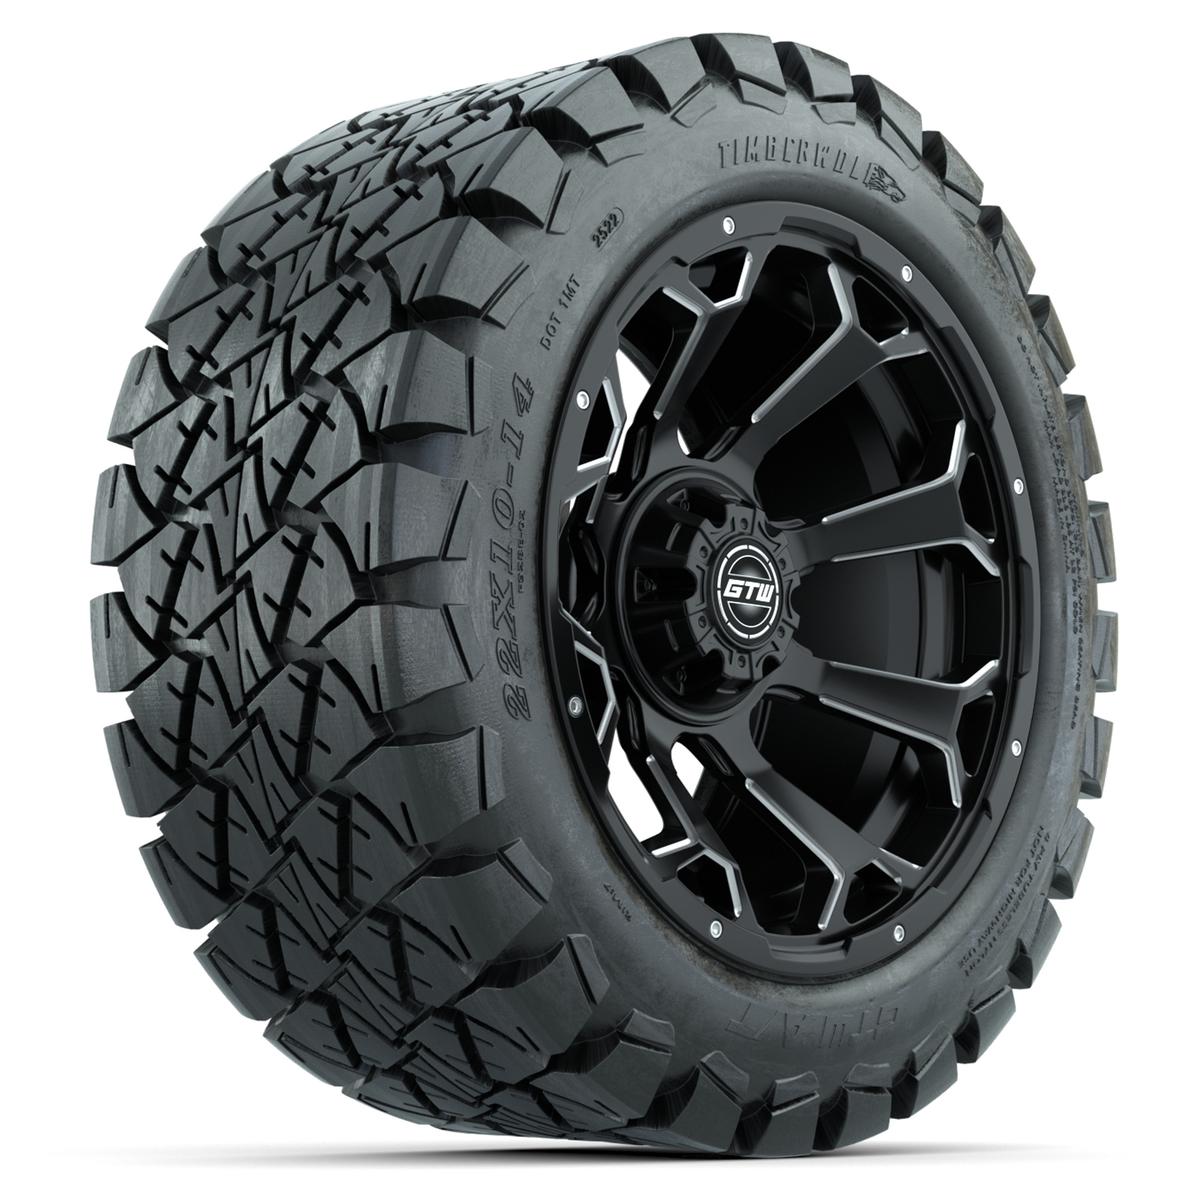 Set of (4) 14 in GTW Raven Wheels with 22x10-14 GTW Timberwolf All-Terrain Tires